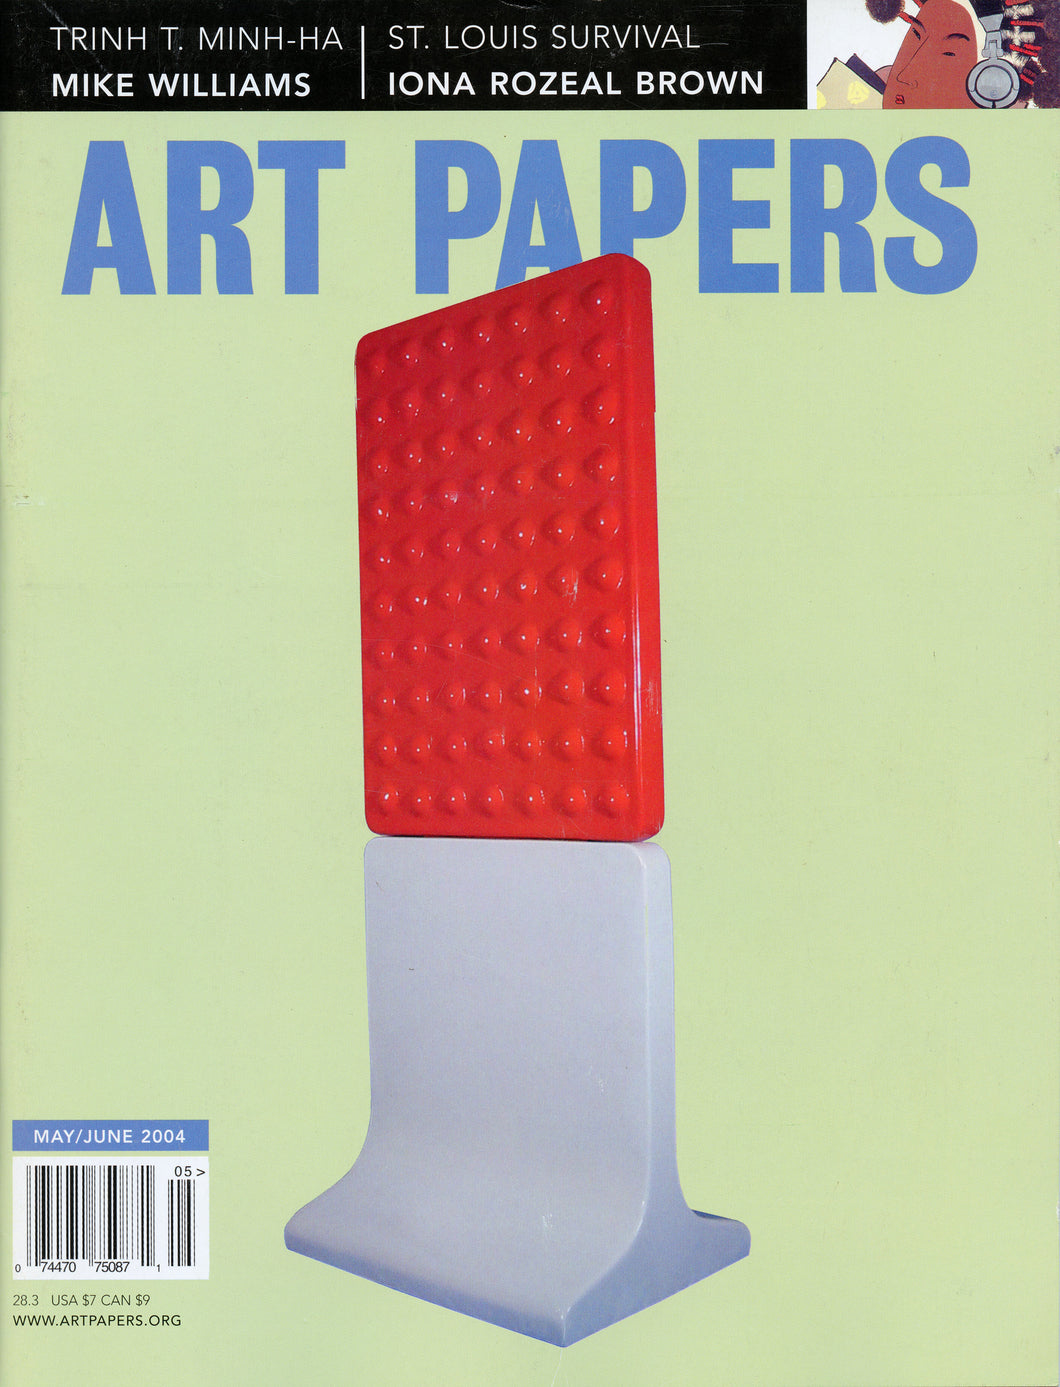 ART PAPERS 28.03 - May/June 2004 - SOLD OUT